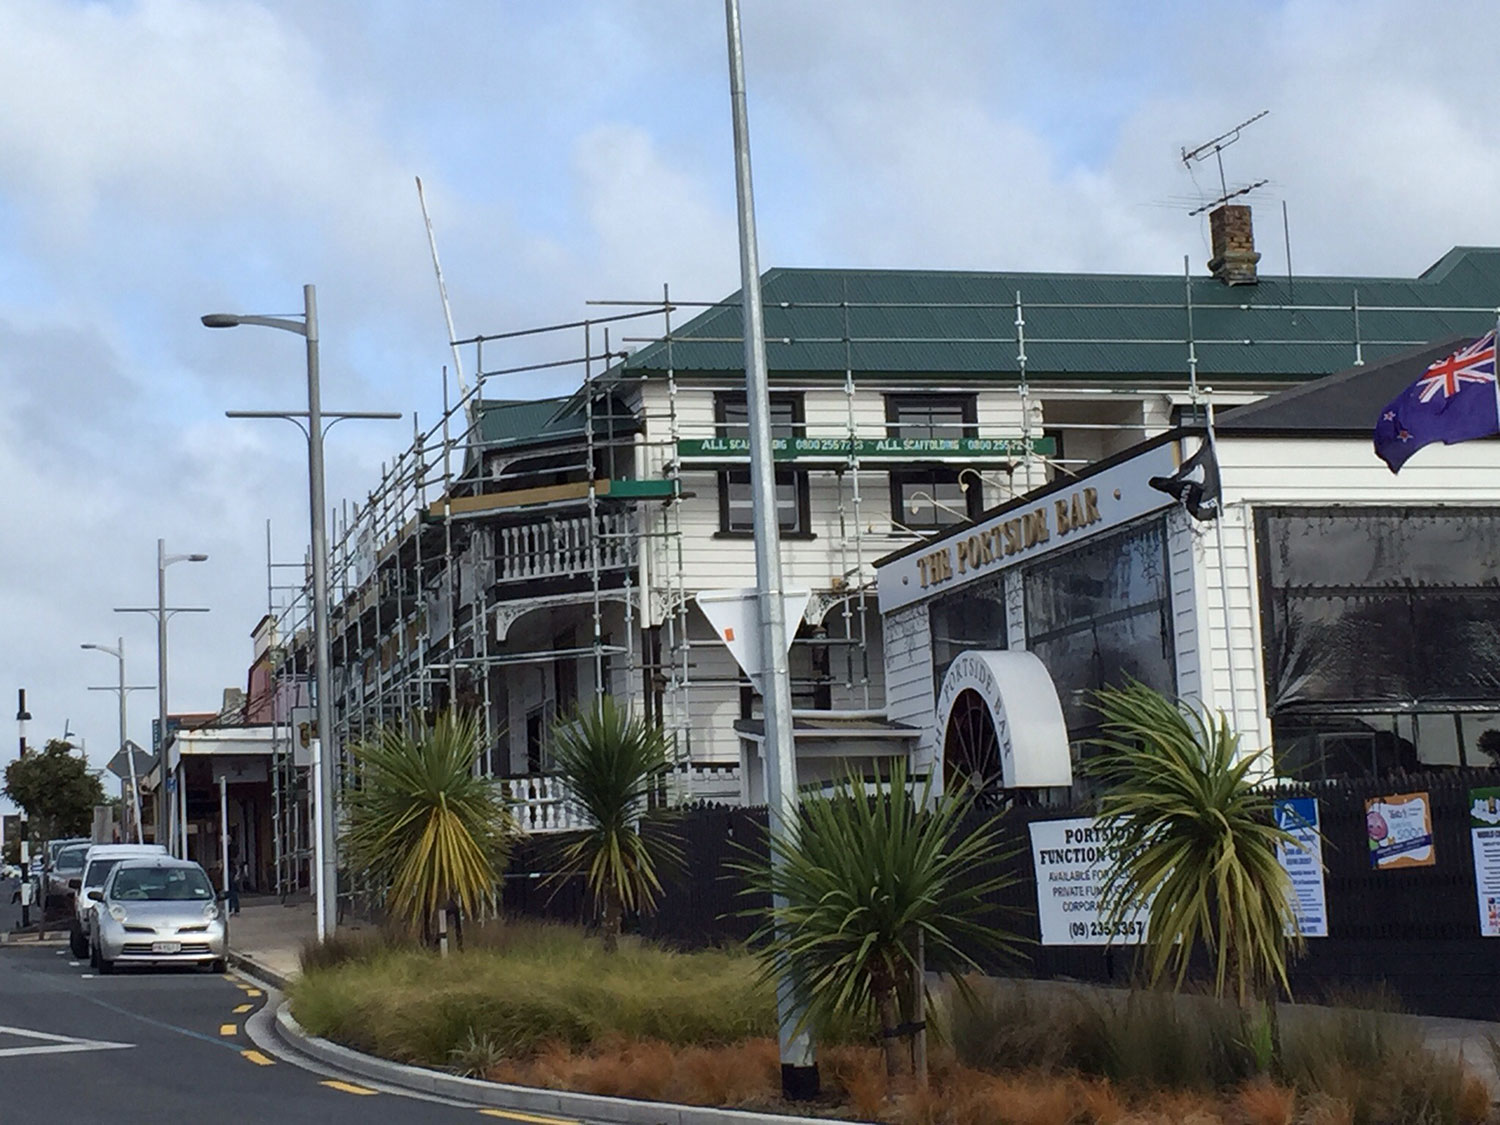 auckland roofing solutions services auckland and new zealand wide new roofs repair cladding and more Project gallery 54